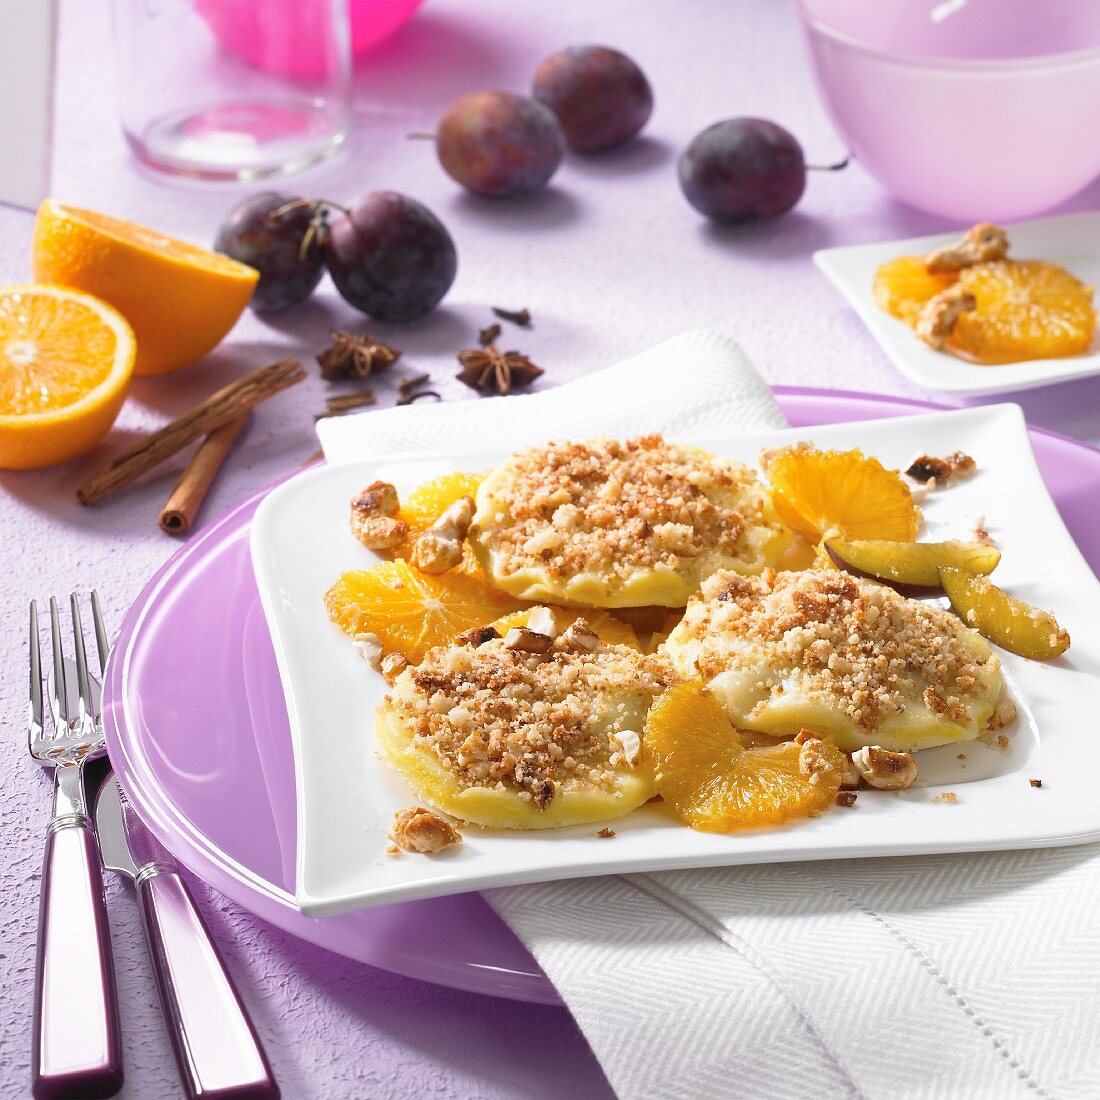 Powidltaschen (stewed plum pastries) with oranges, plums and nuts